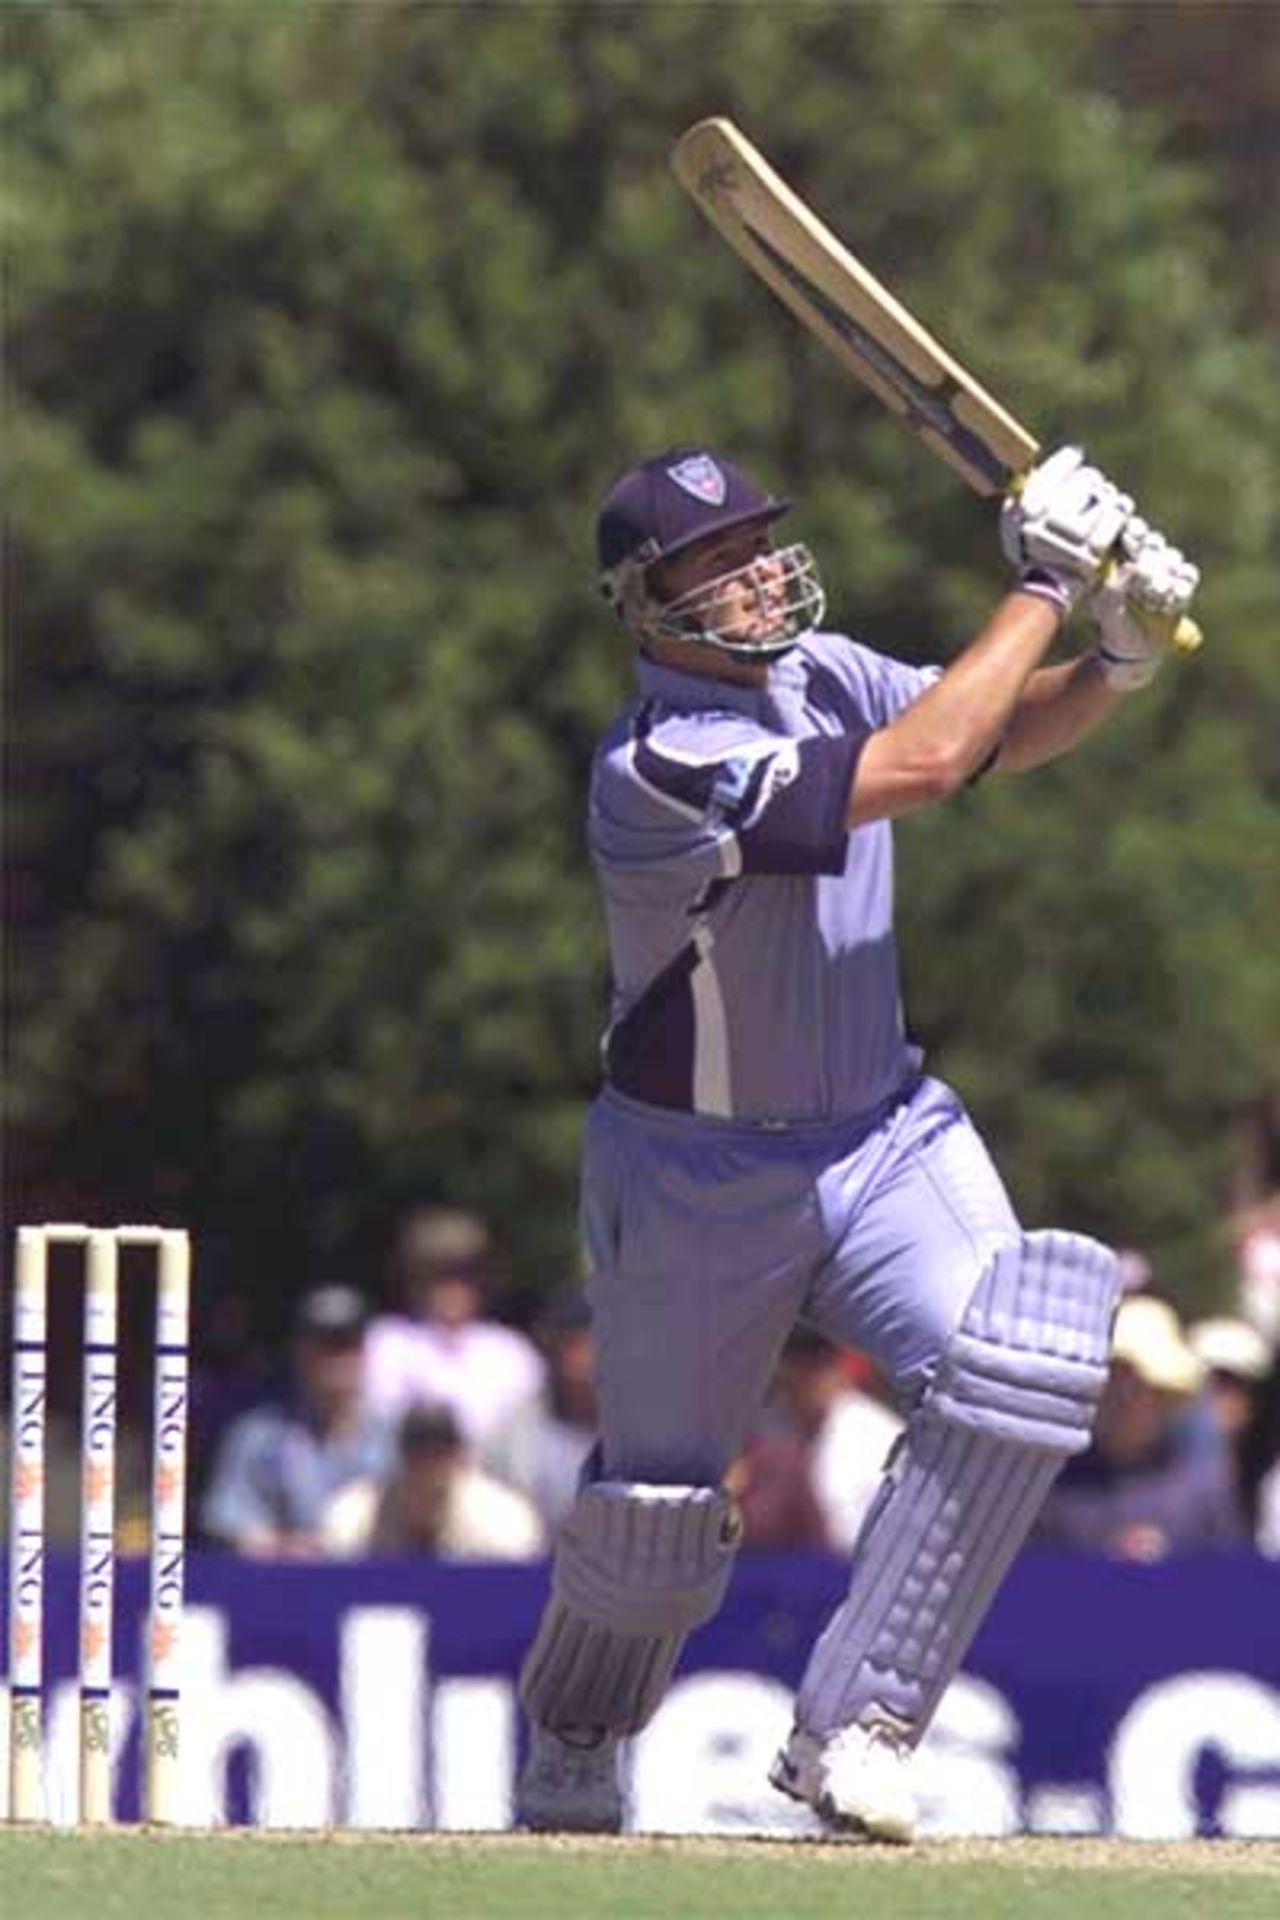 07 Oct 2001: Shane Lee of the Blues in action during the New South Wales Blues v Victorian Bushrangers ING Cup match played at Bankstown Oval in Sydney, Australia.